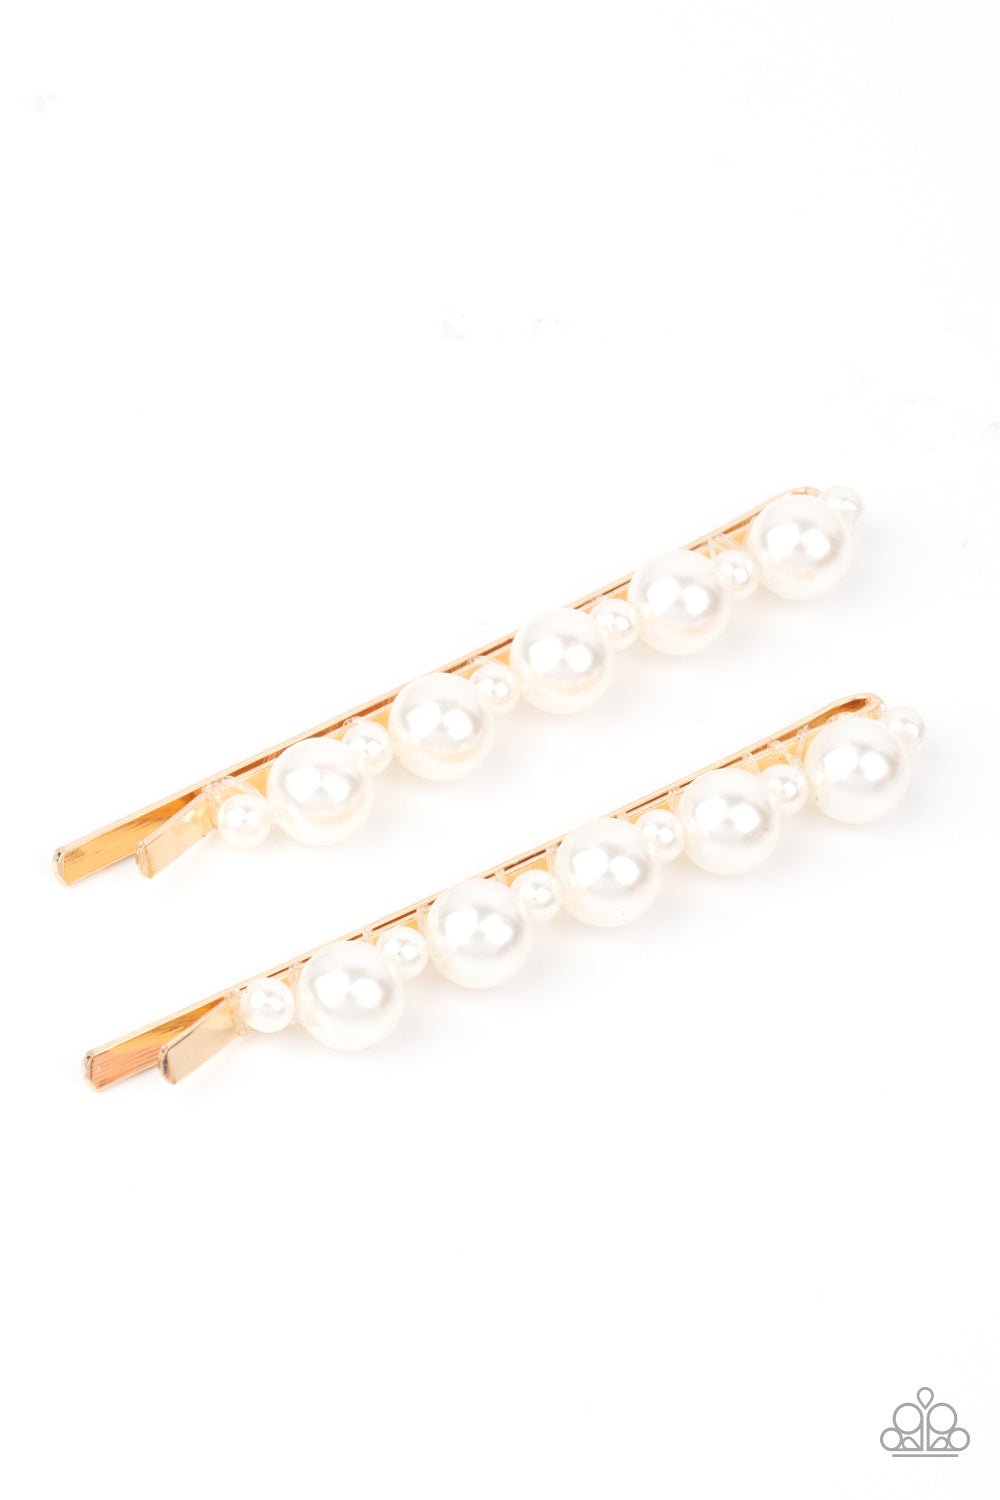 Paparazzi Accessories - Put A Pin In It #HB36 - Gold Hair Clip